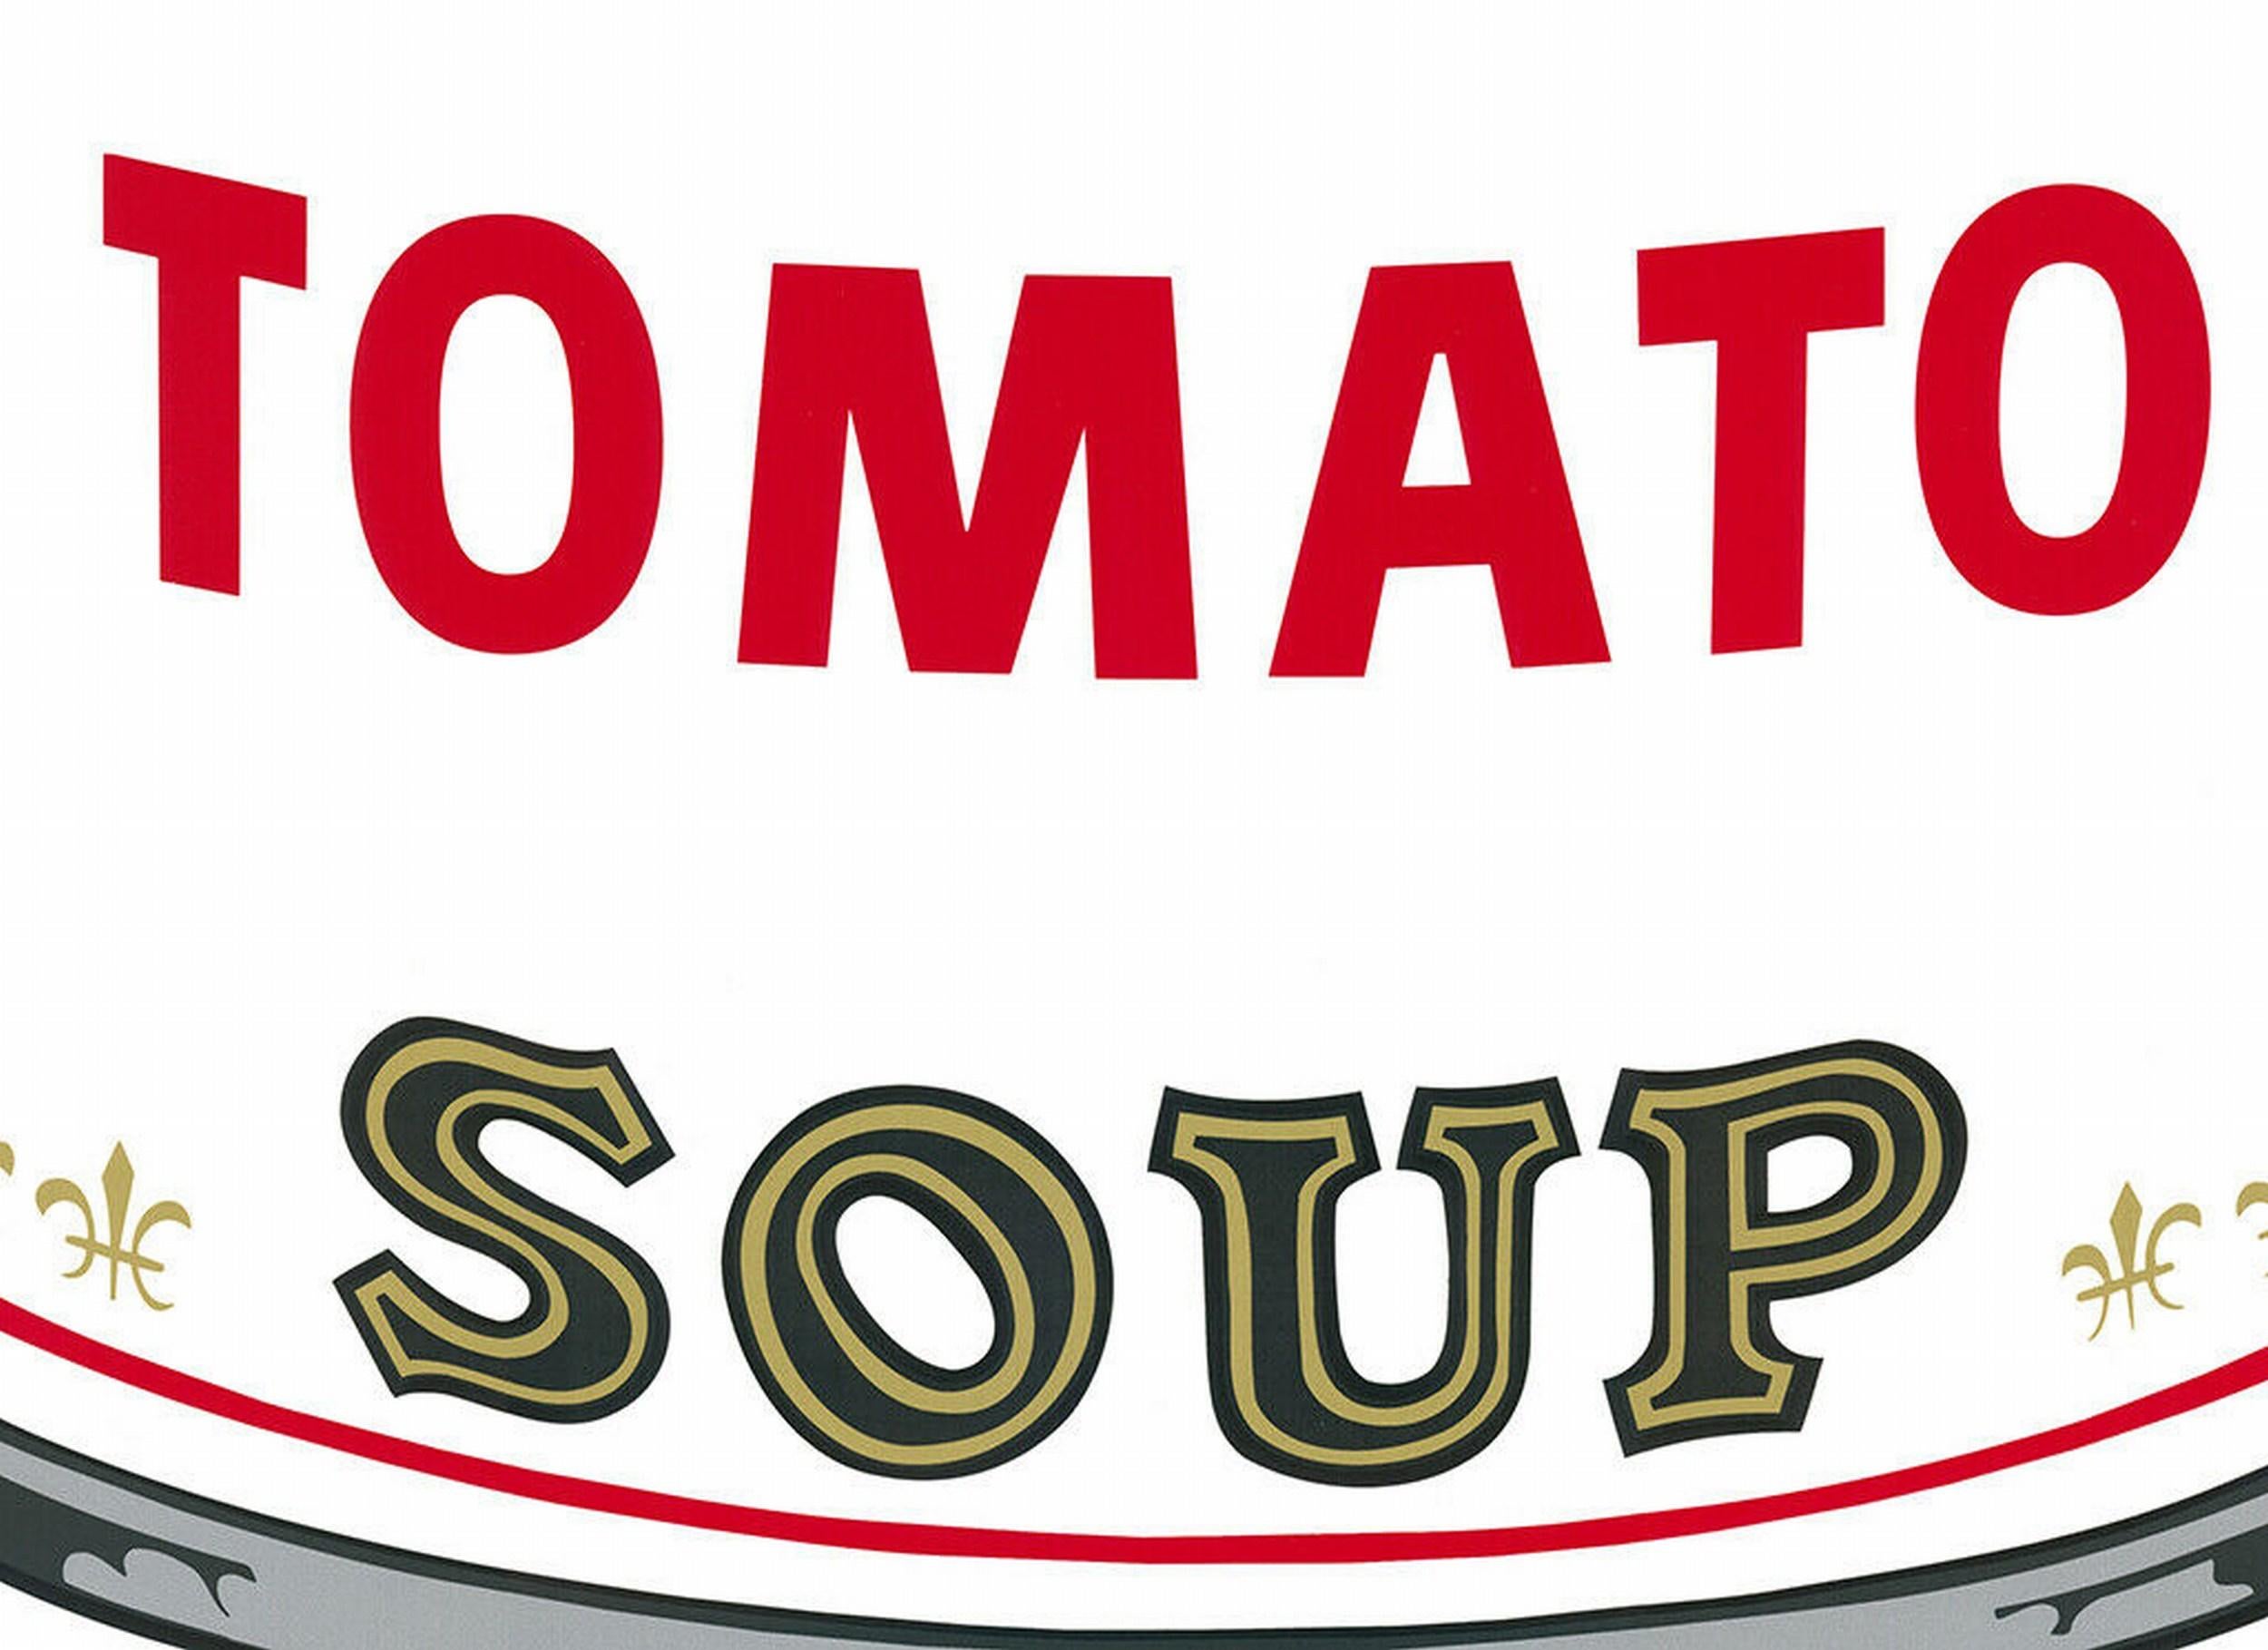 Campbell´s Tomato Soup (Andy Warhol, Pop Art) $45 SHIPPING U.S. only (not $499!) 3